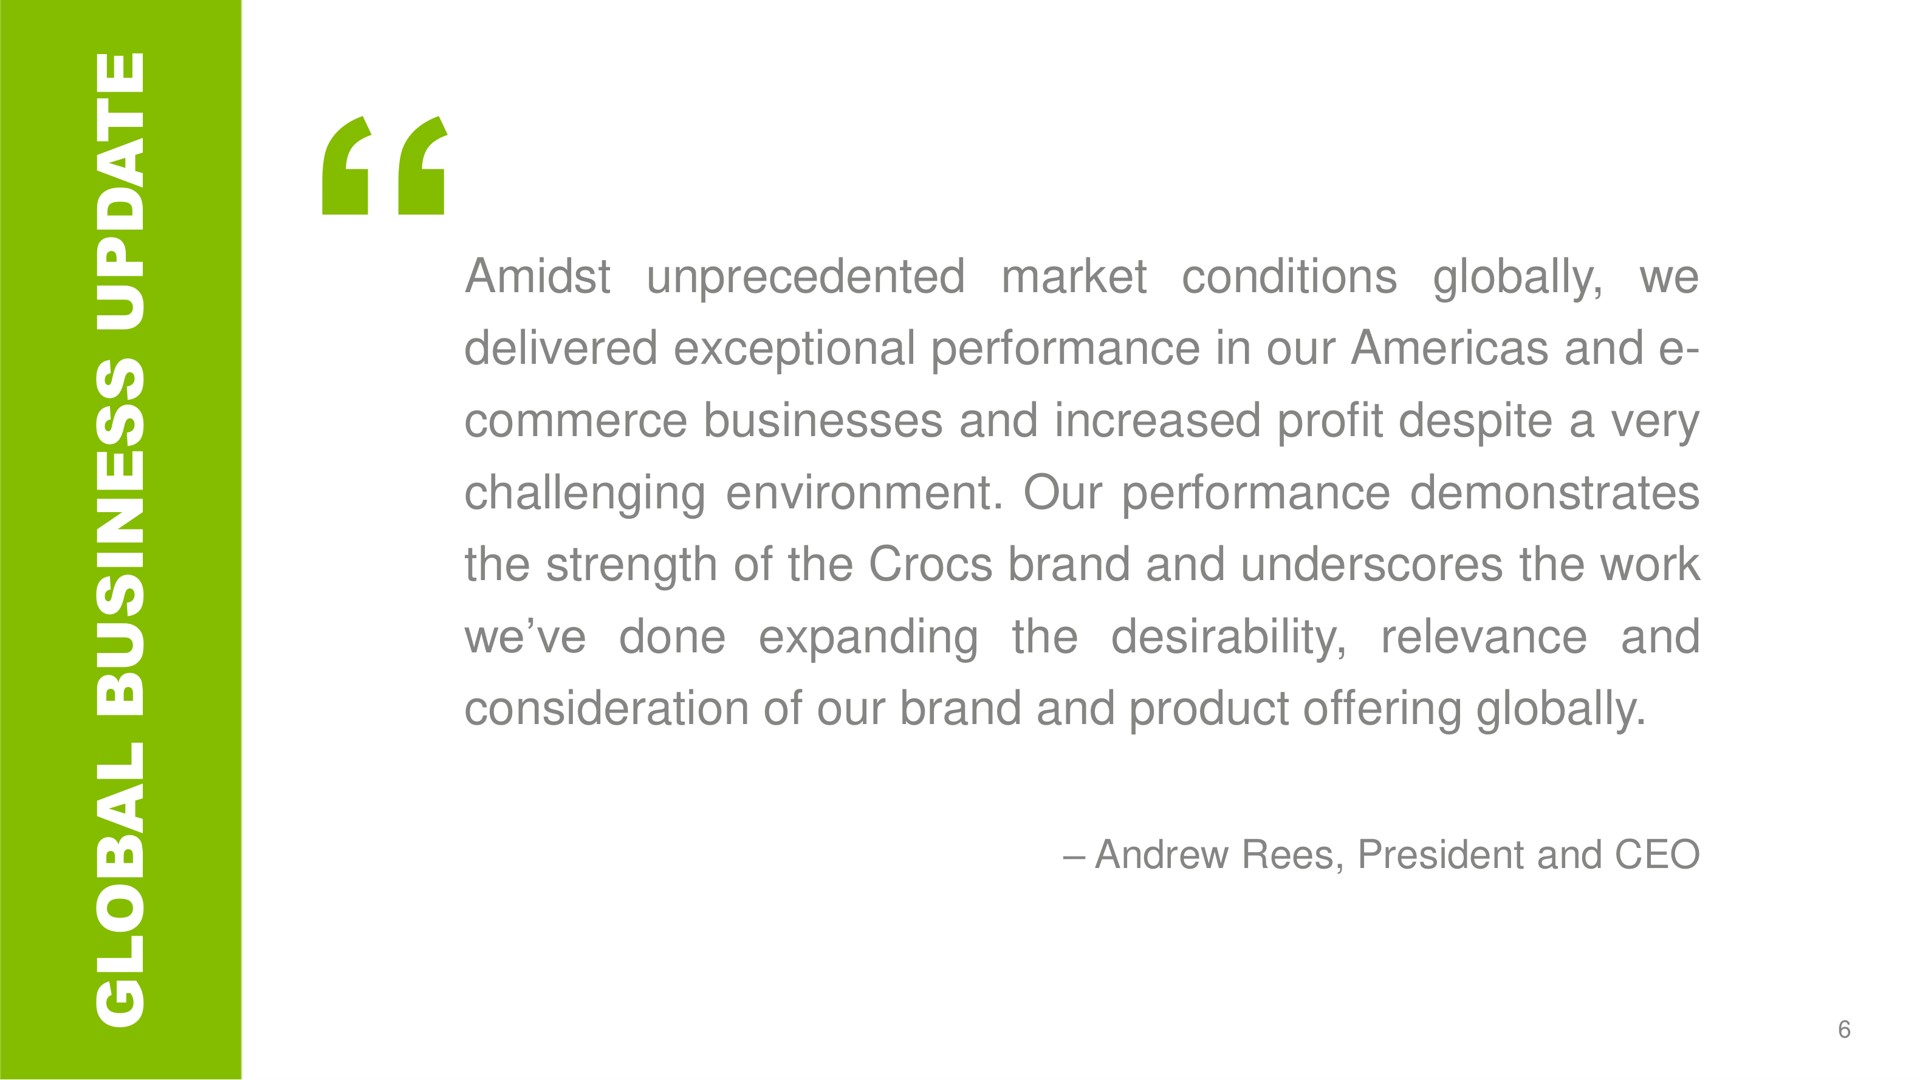 a a amidst unprecedented market conditions globally we delivered exceptional performance in our and commerce businesses and increased profit despite a very challenging environment our performance demonstrates the strength of the brand and underscores the work we done expanding the desirability relevance and consideration of our brand and product offering globally president and i | Crocs